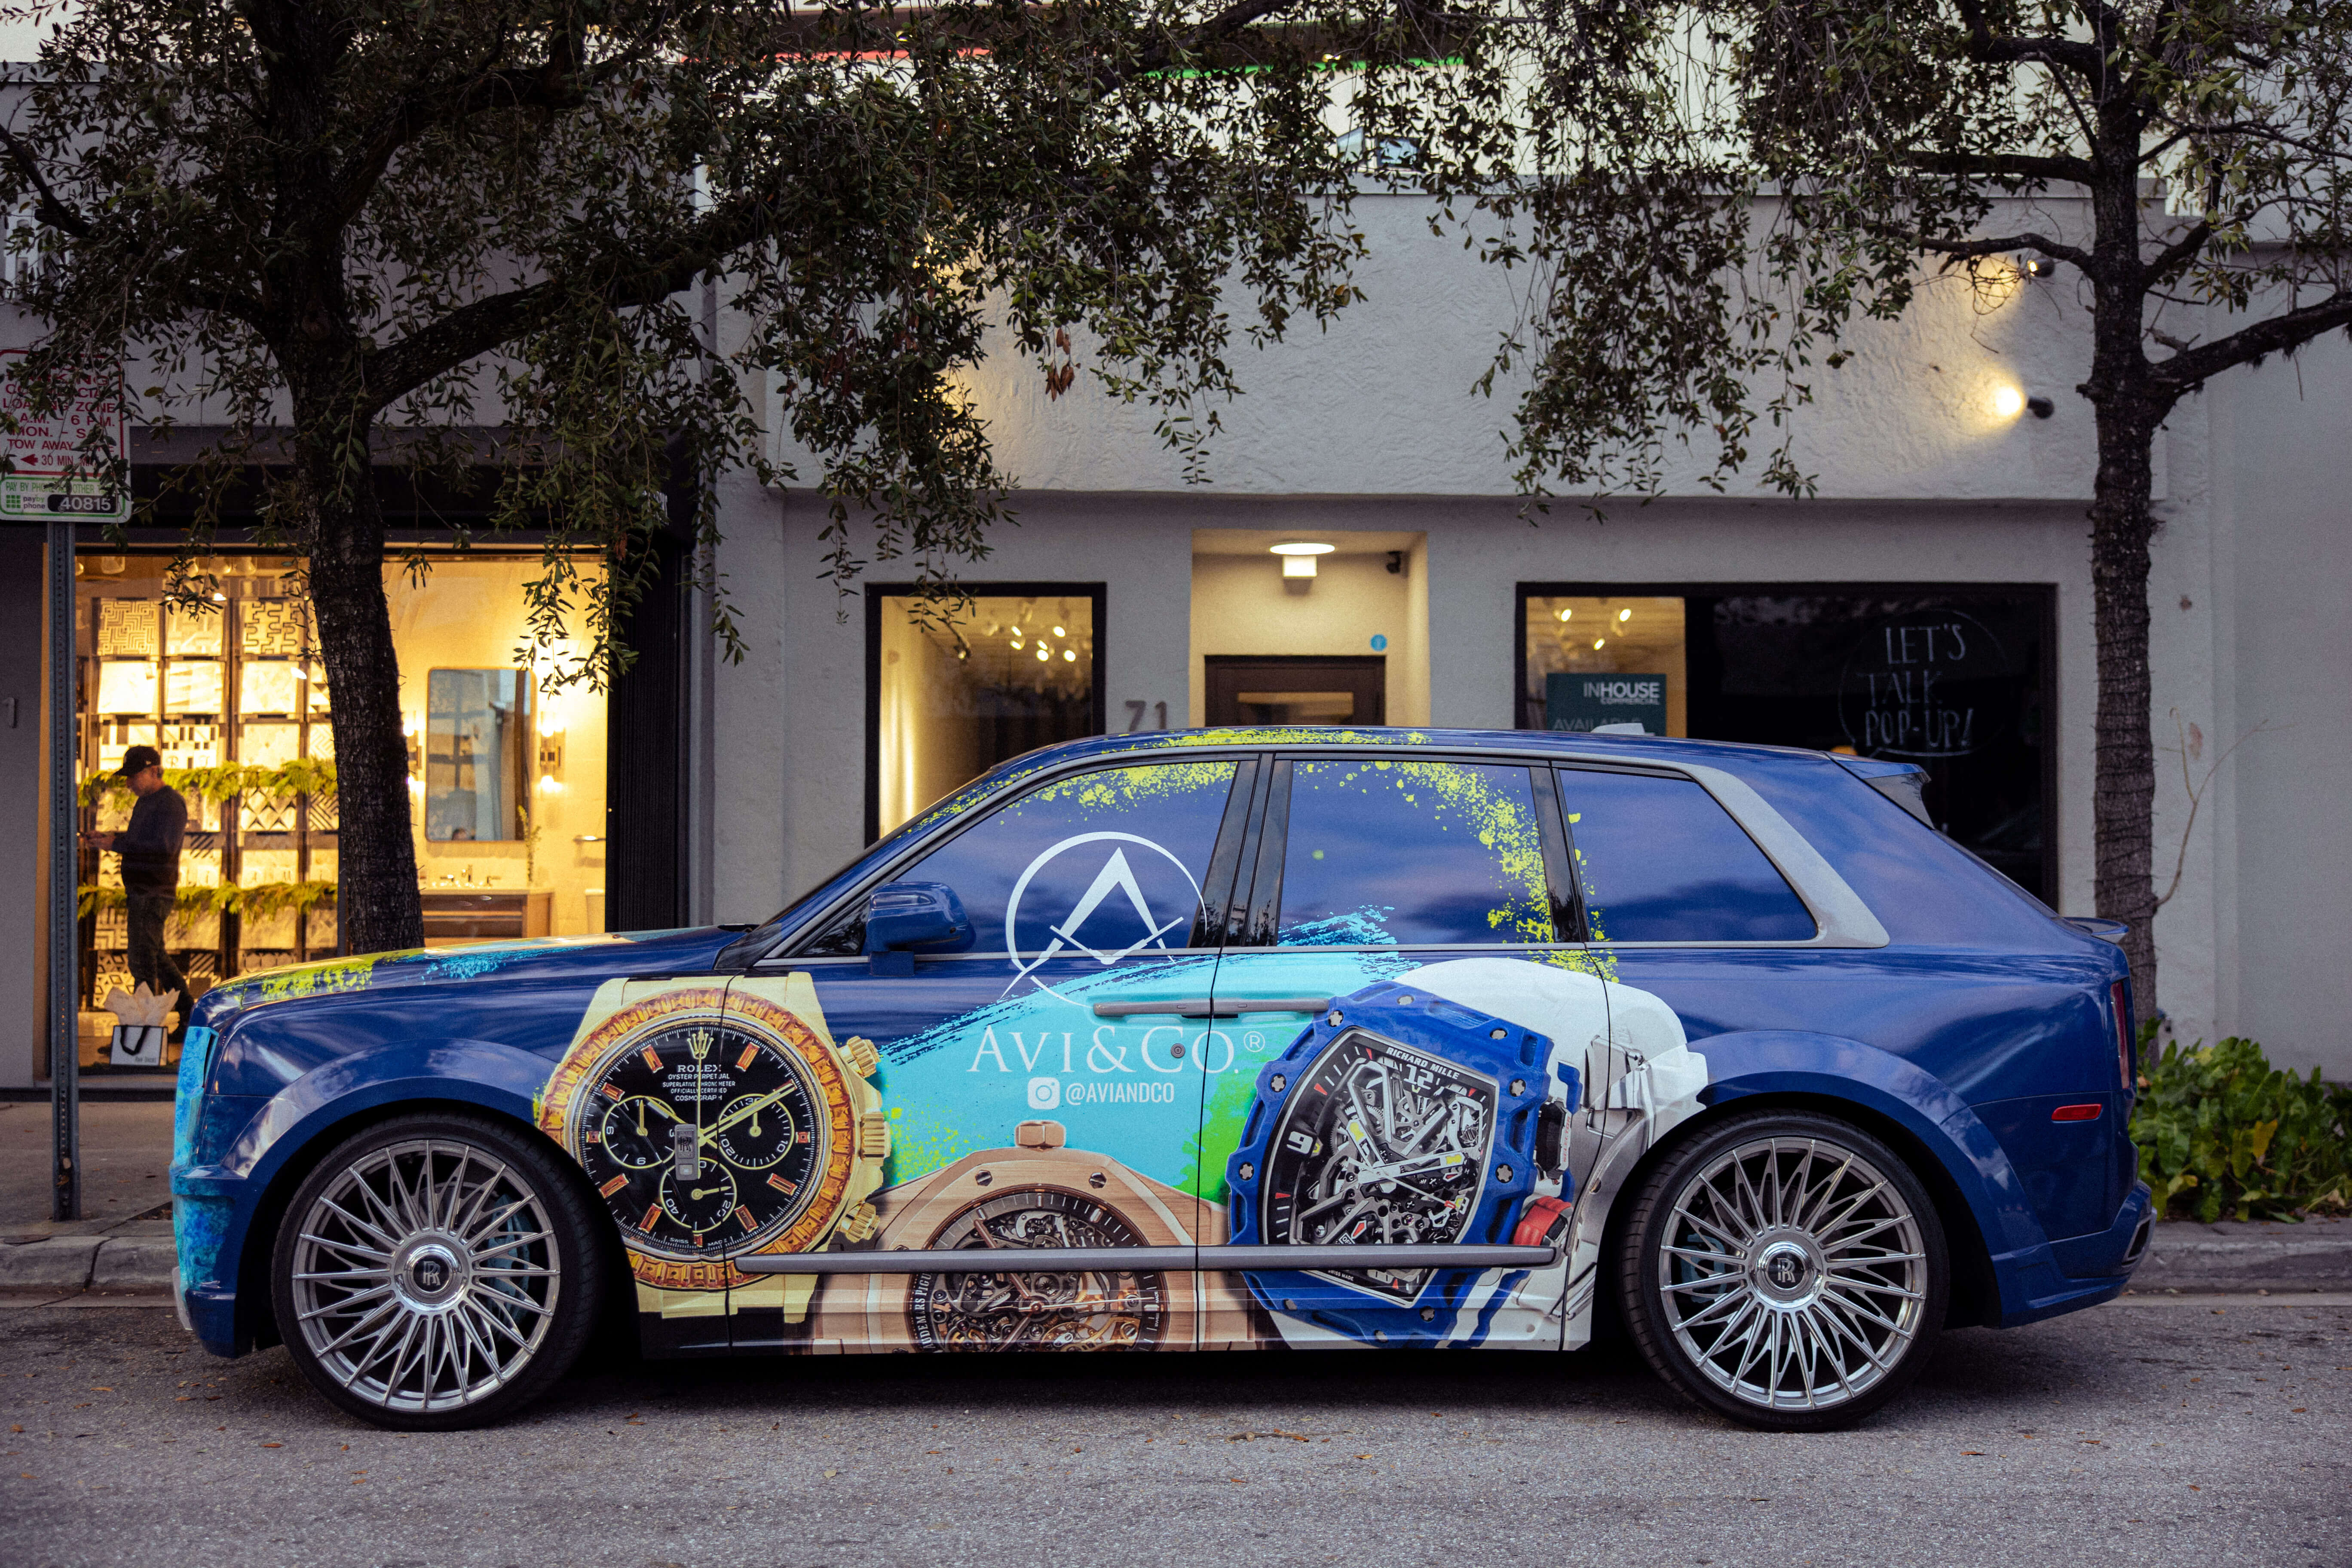 Luxury Car Outside of the Miami Boutique Decorated in Blue with a Rolex Daytona, Richard Mille, and Audemars Piguet Luxury Timepiece.